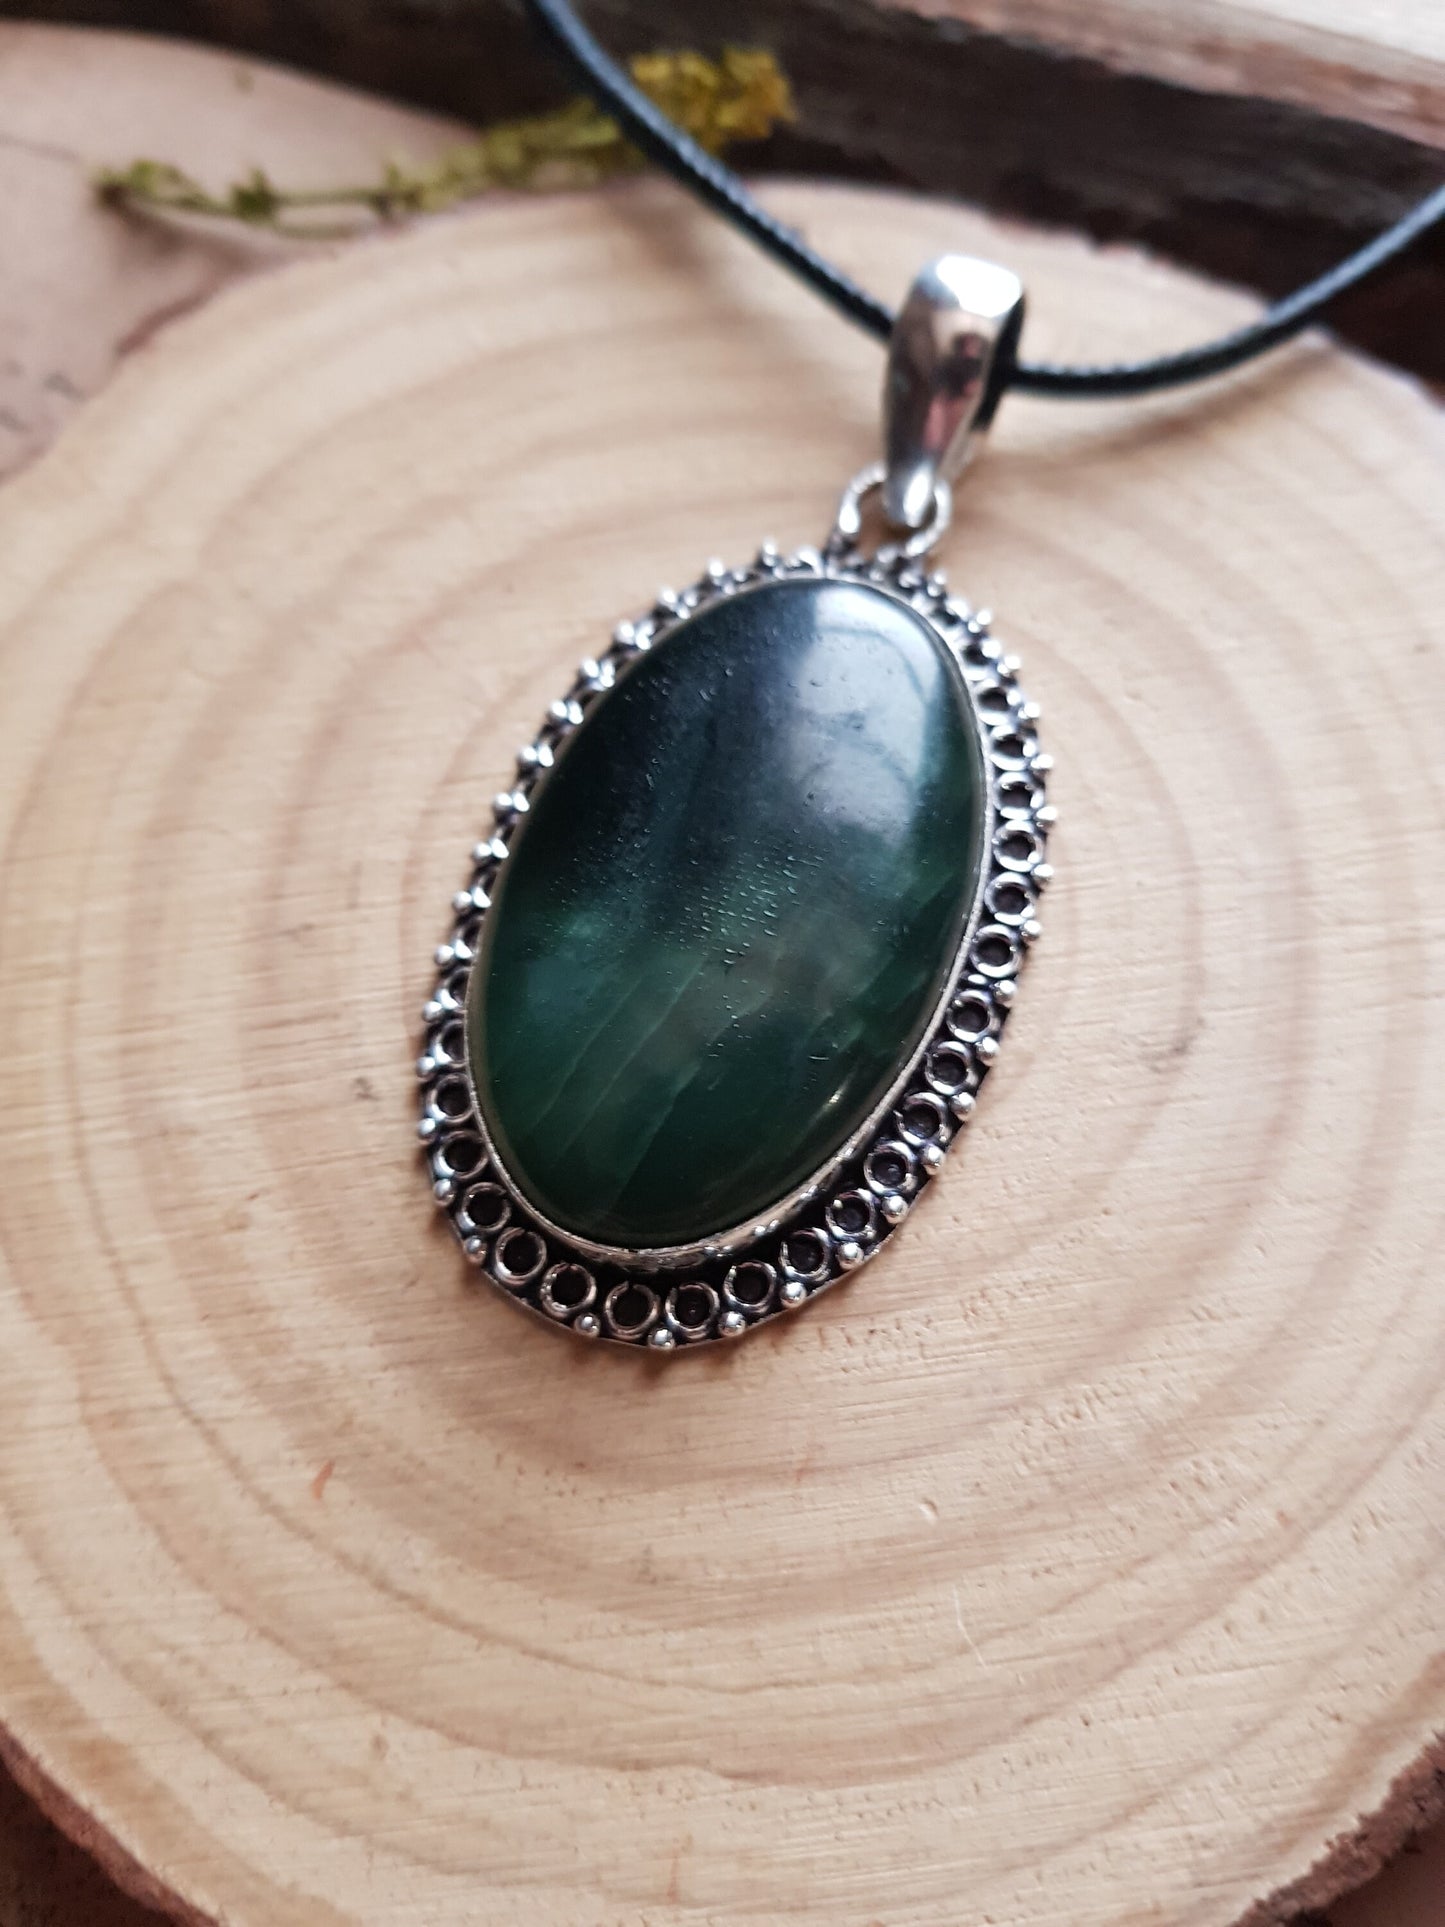 Nephrite Jade Pendant, Statement Necklace In Sterling Sivler, Crystal Necklace, Unisex Gift